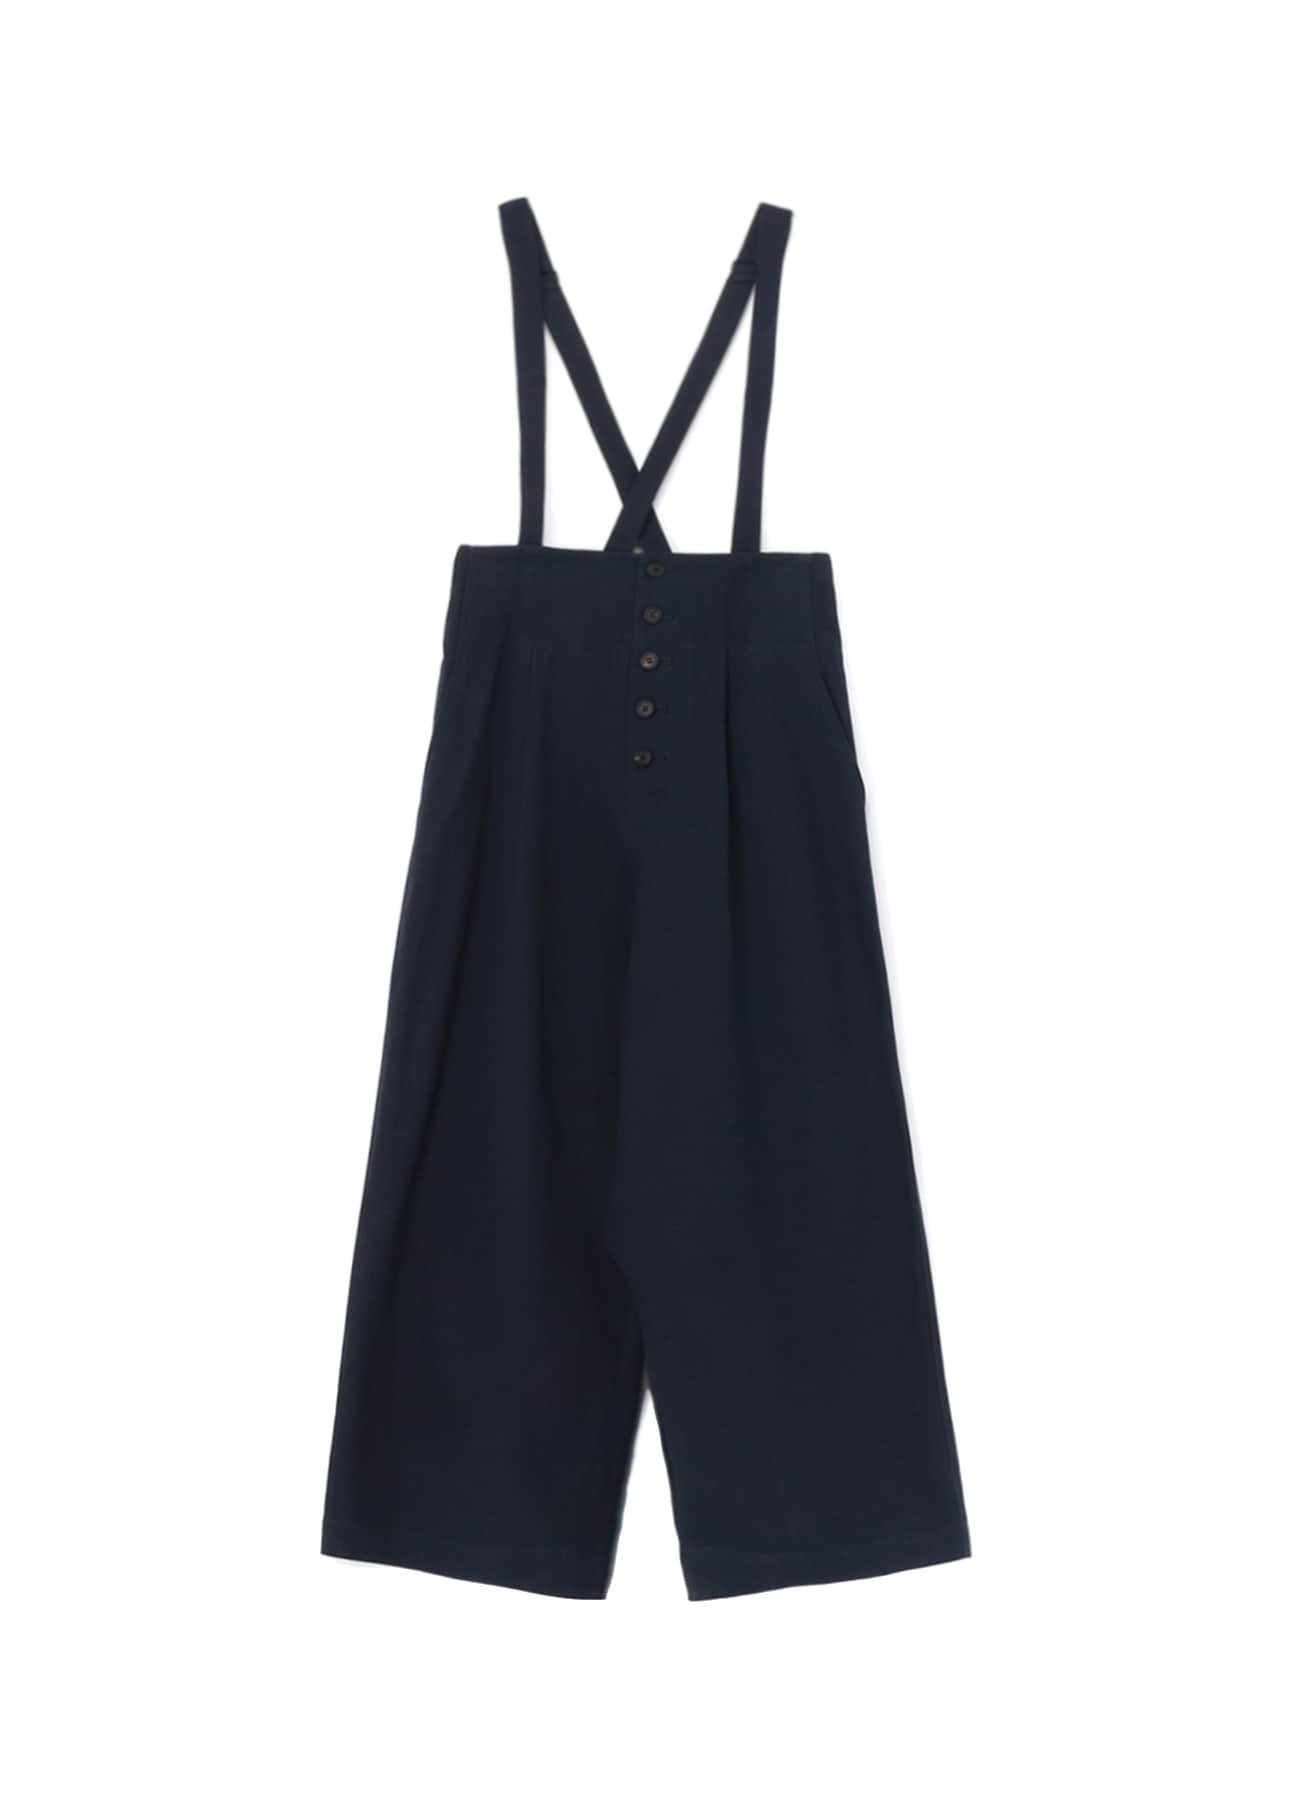 DENIM PANTS WITH SUSPENDER BUTTONS AND ADJUSTABLE SIDE TABS(S INDIGO): Y's  for men｜WILDSIDE YOHJI YAMAMOTO [Official